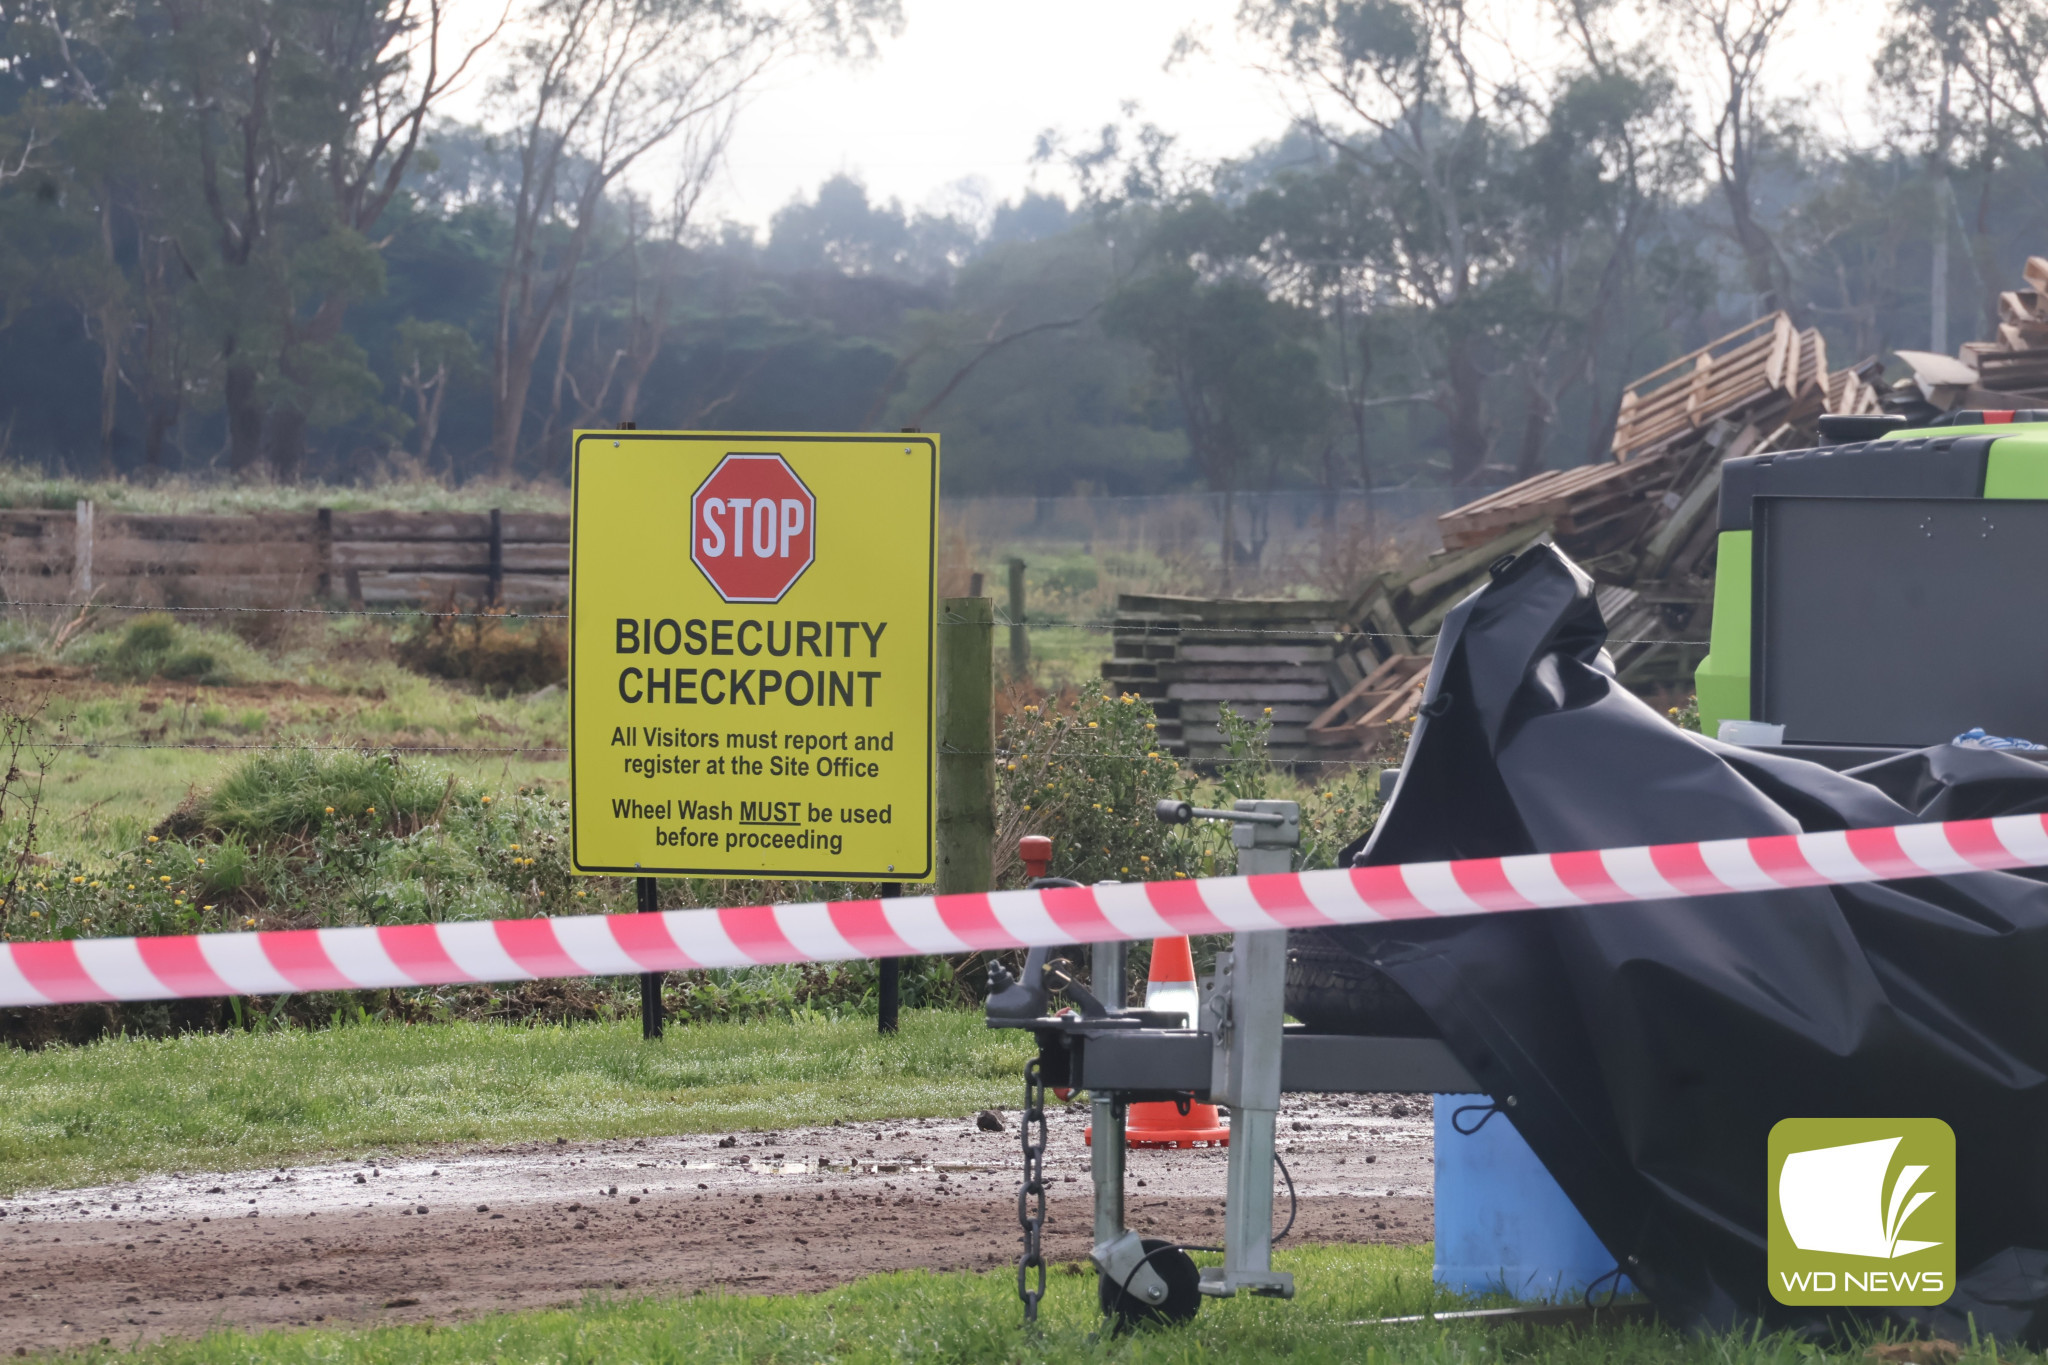 Containment efforts continue: Agriculture Victoria has confirmed the recent outbreak of Avian Influenza has required the culling of 160,000 birds at a Terang poultry farm.